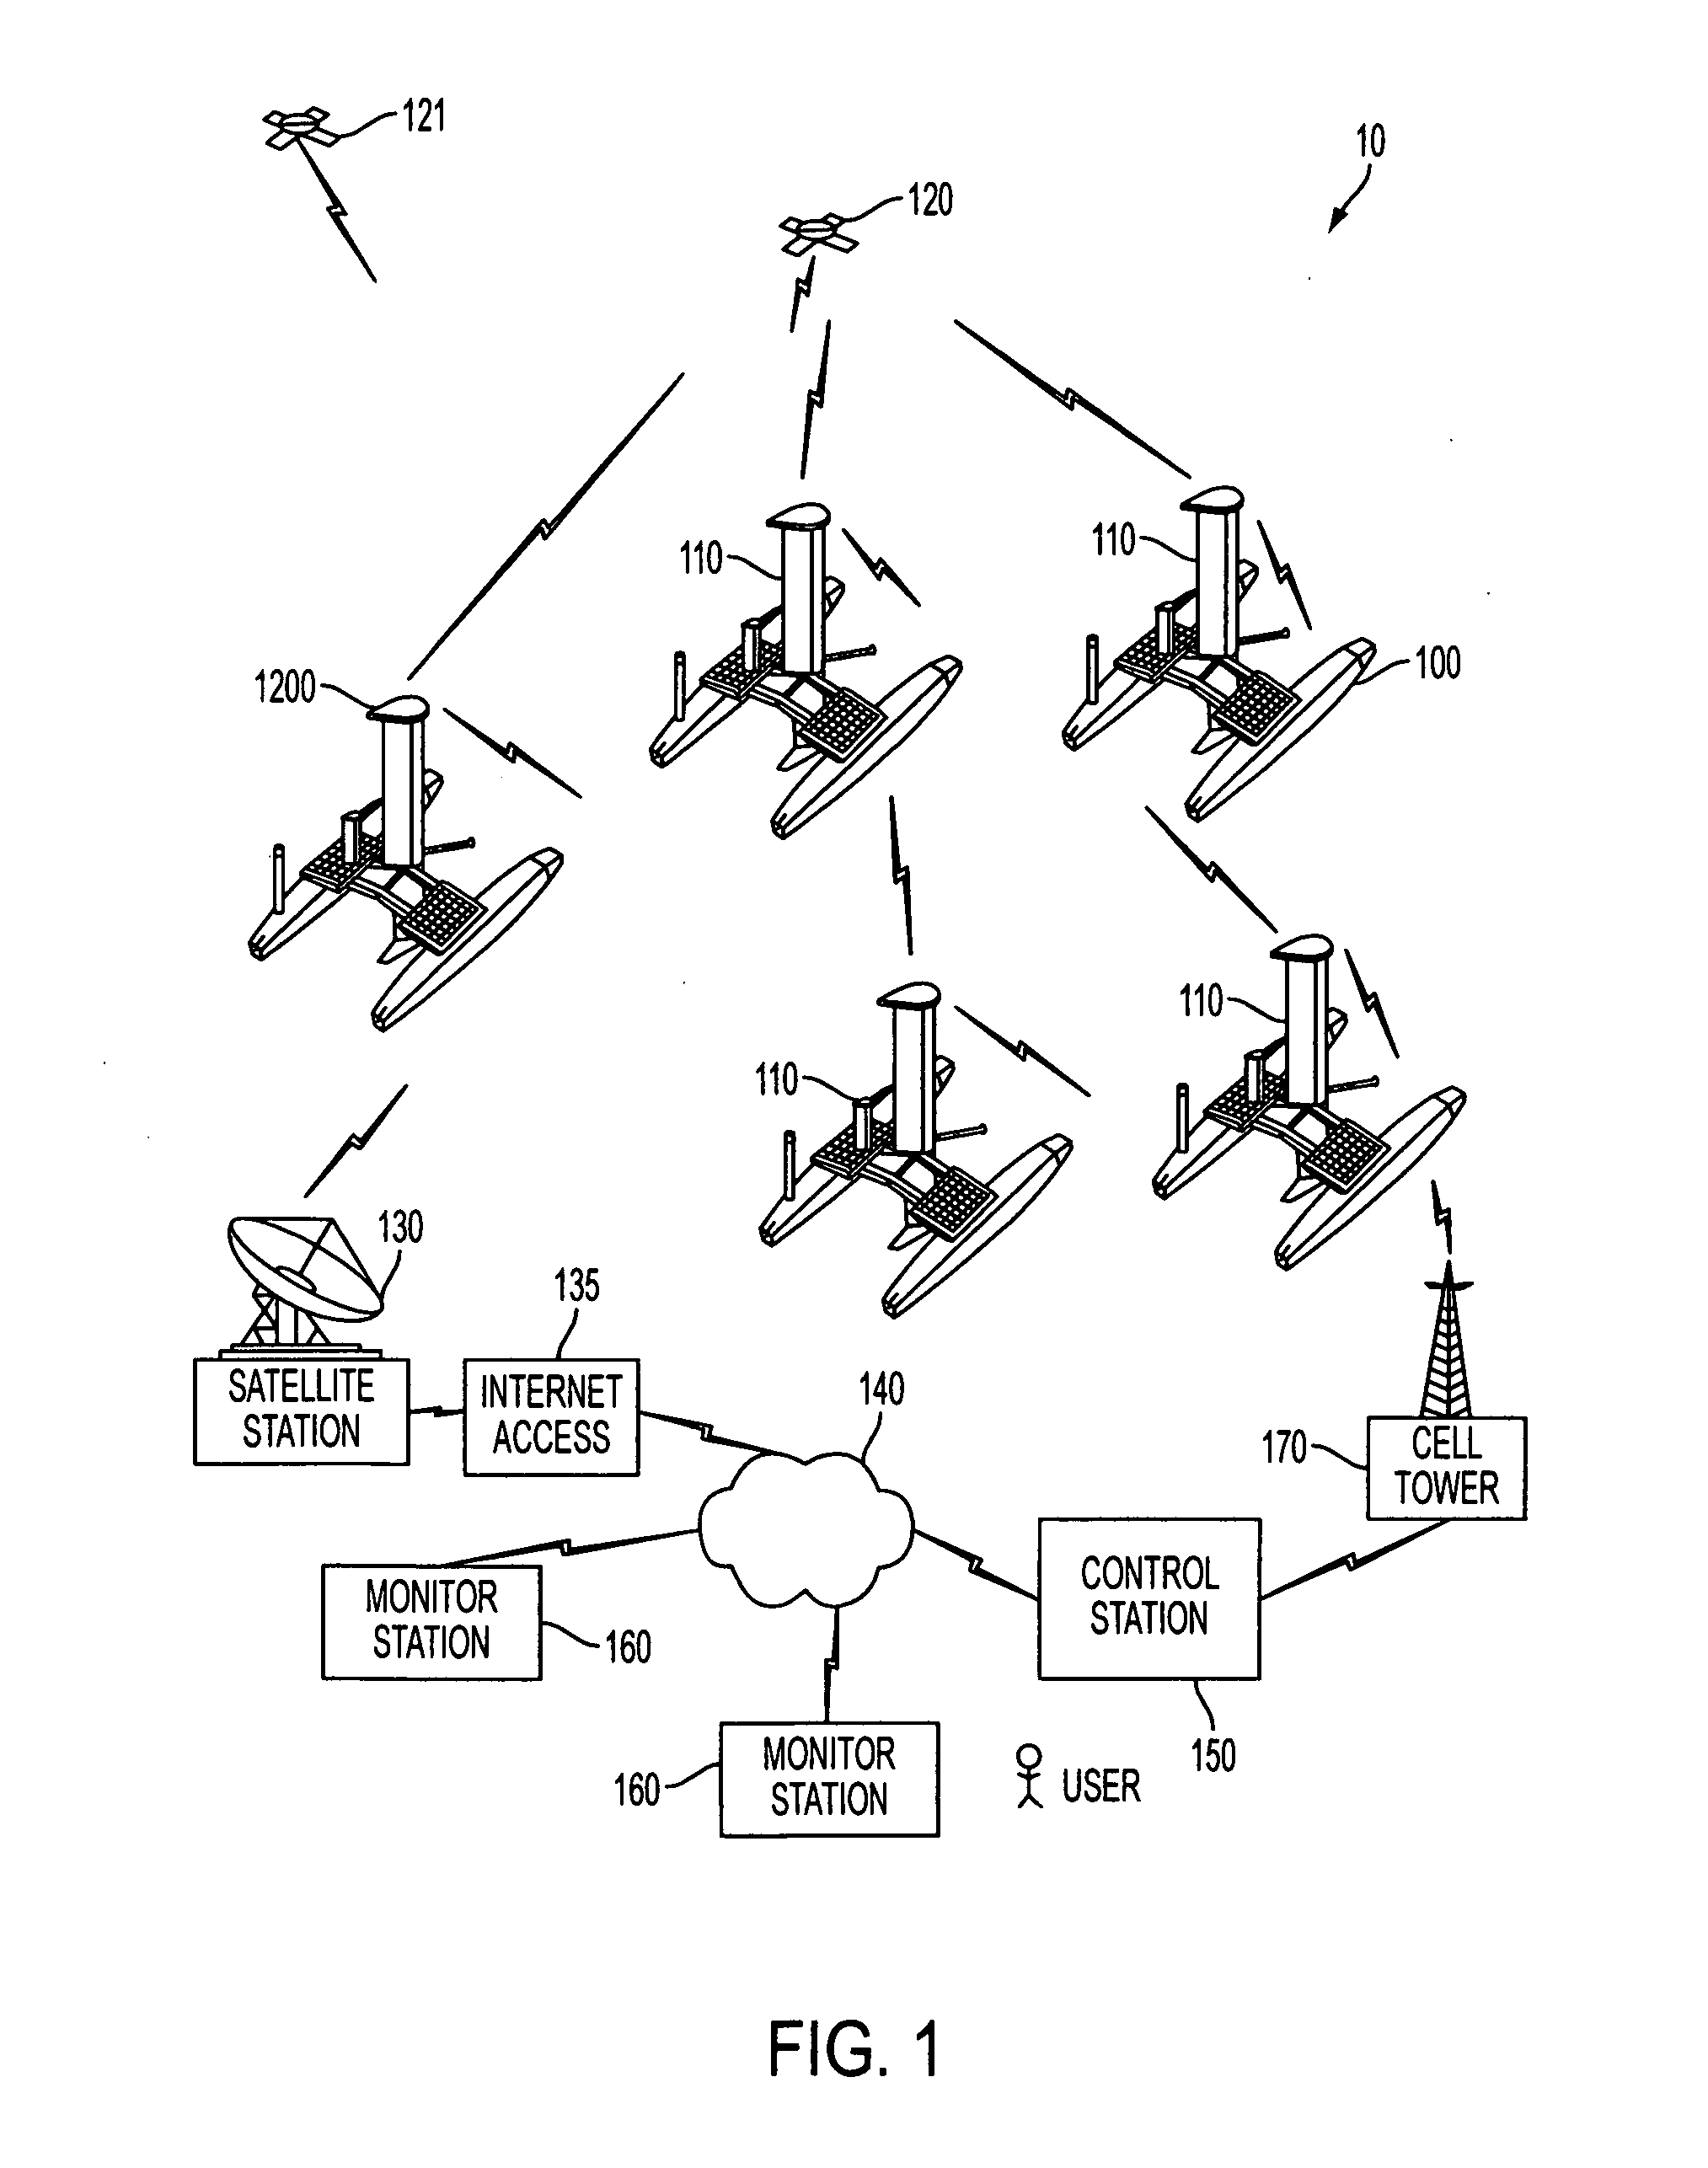 System and Method for Control of Autonomous Marine Vessels